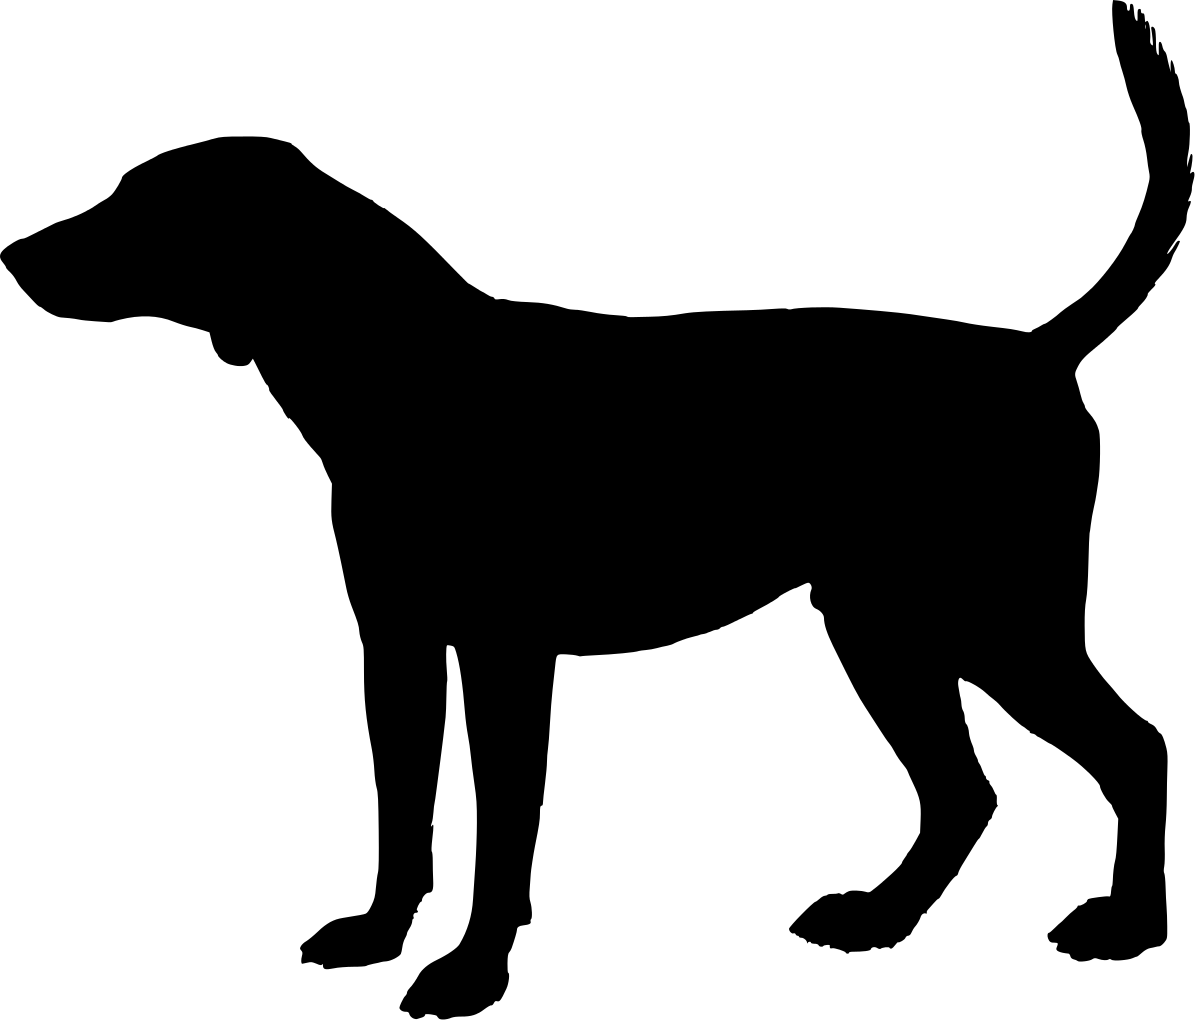 Dog Head Silhouette Png Images & Pictures - Becuo